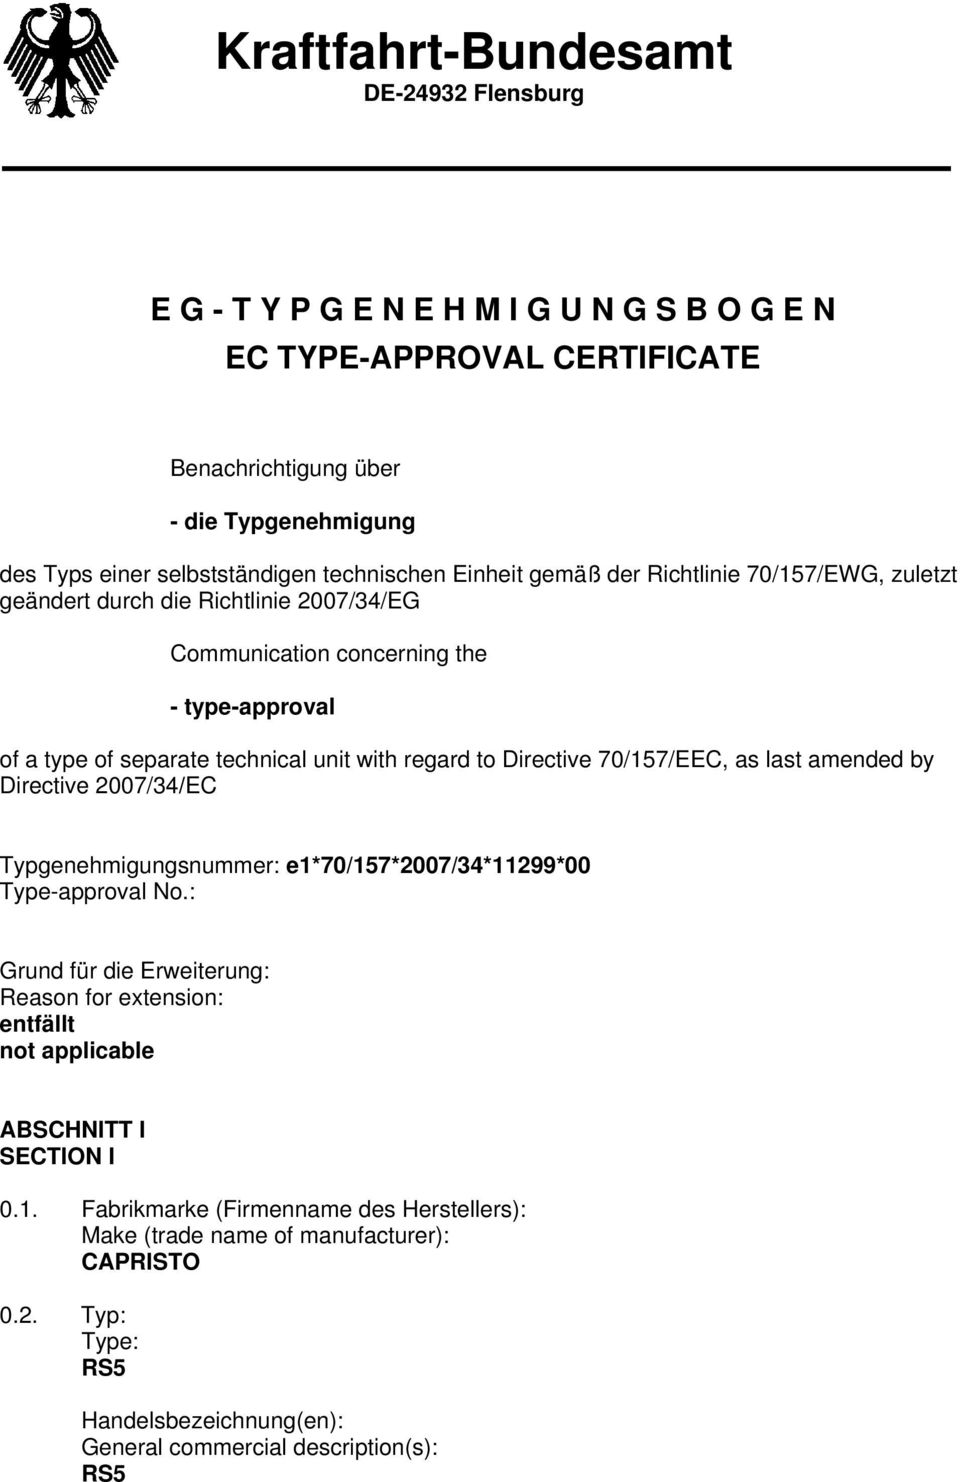 regard to Directive 70/157/EEC, as last amended by Directive 2007/34/EC Typgenehmigungsnummer e1*70/157*2007/34*11299*00 Typeapproval No.